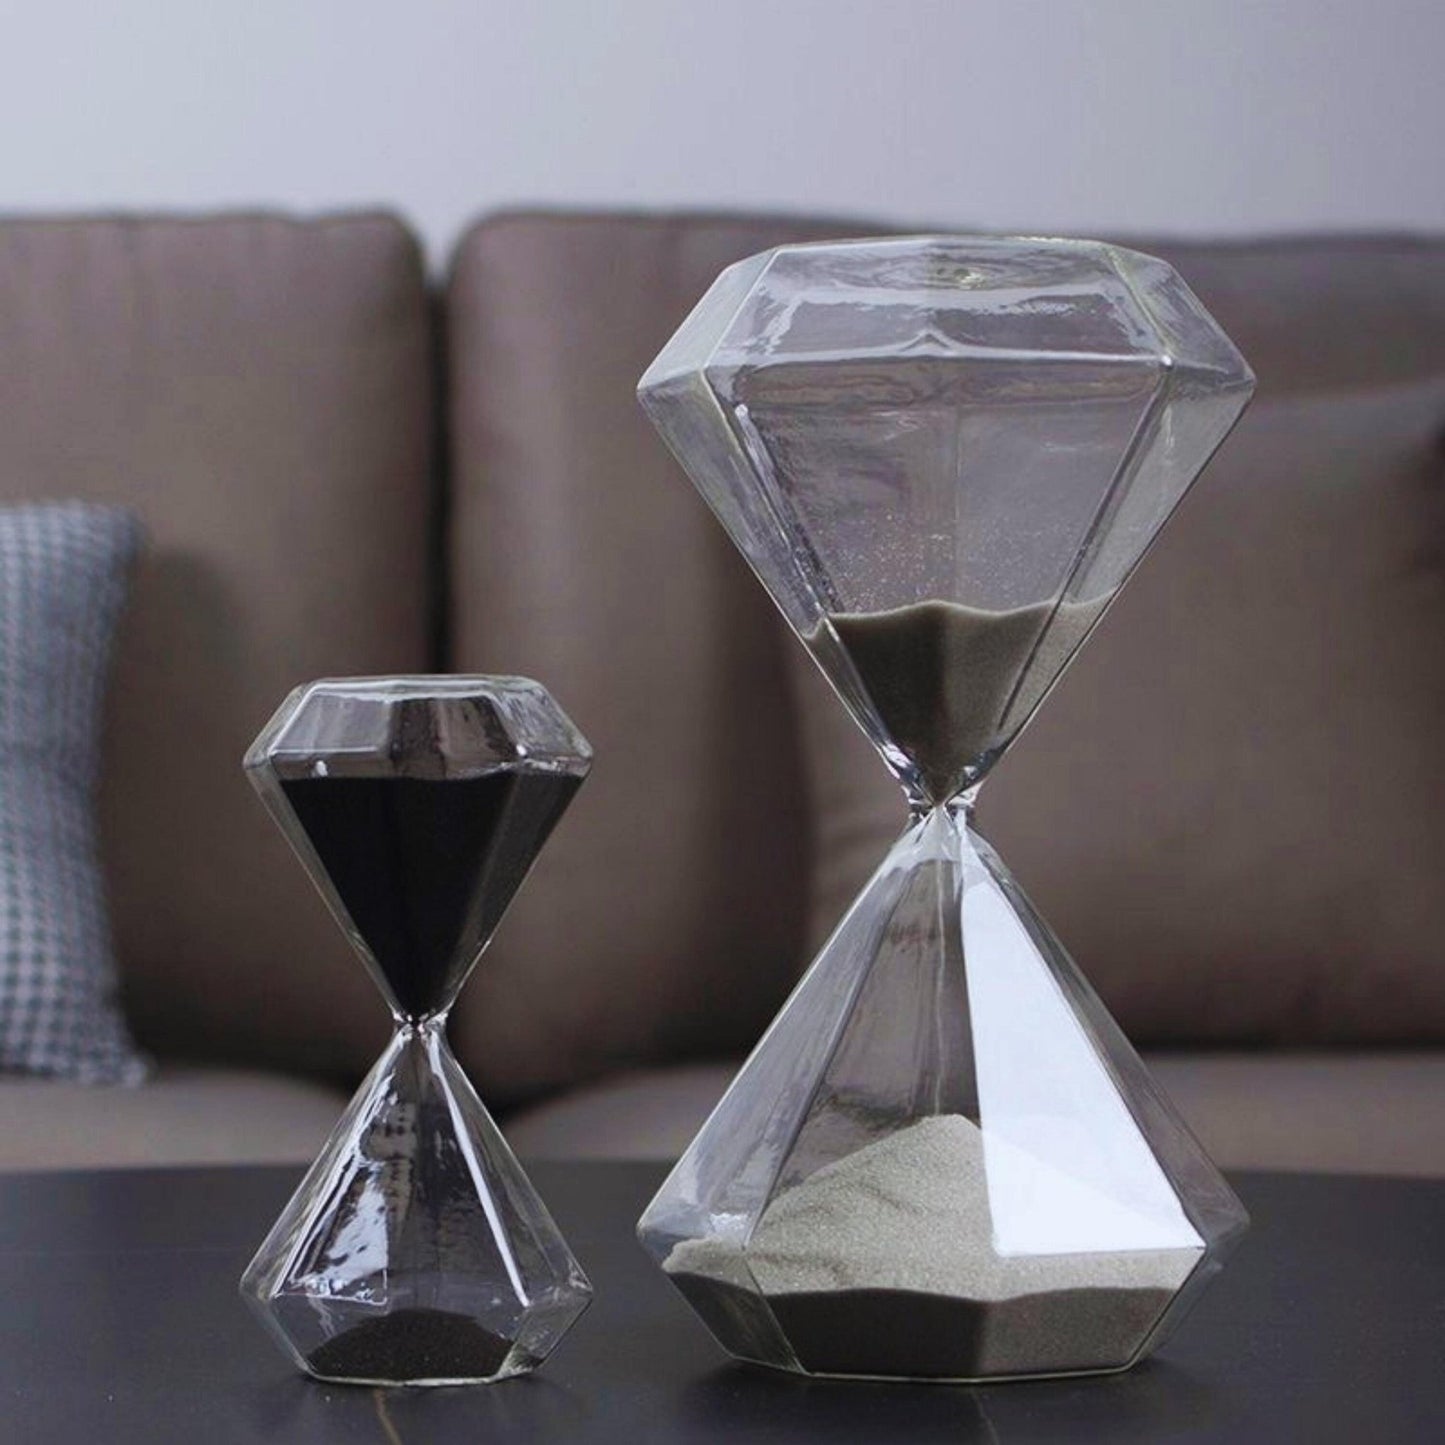 Sands of Space Diamond Hourglass - Space Mesmerise - Space Gifts | Lamps | Statues | Home Decor